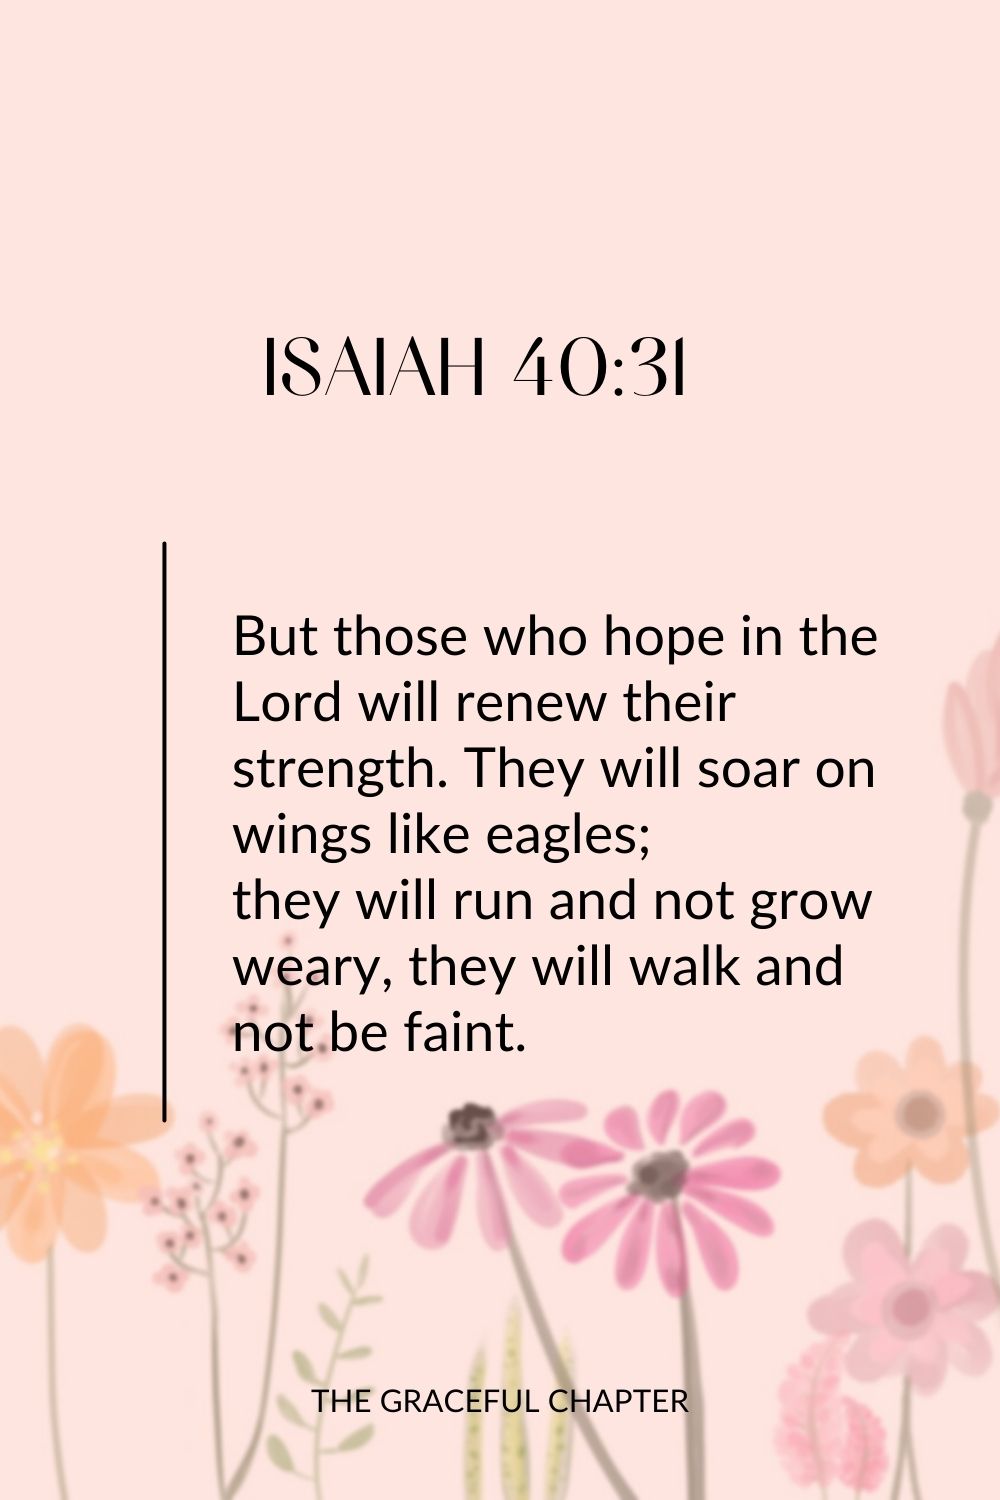 But those who hope in the Lord will renew their strength. They will soar on wings like eagles; they will run and not grow weary, they will walk and not be faint. Isaiah 40:31